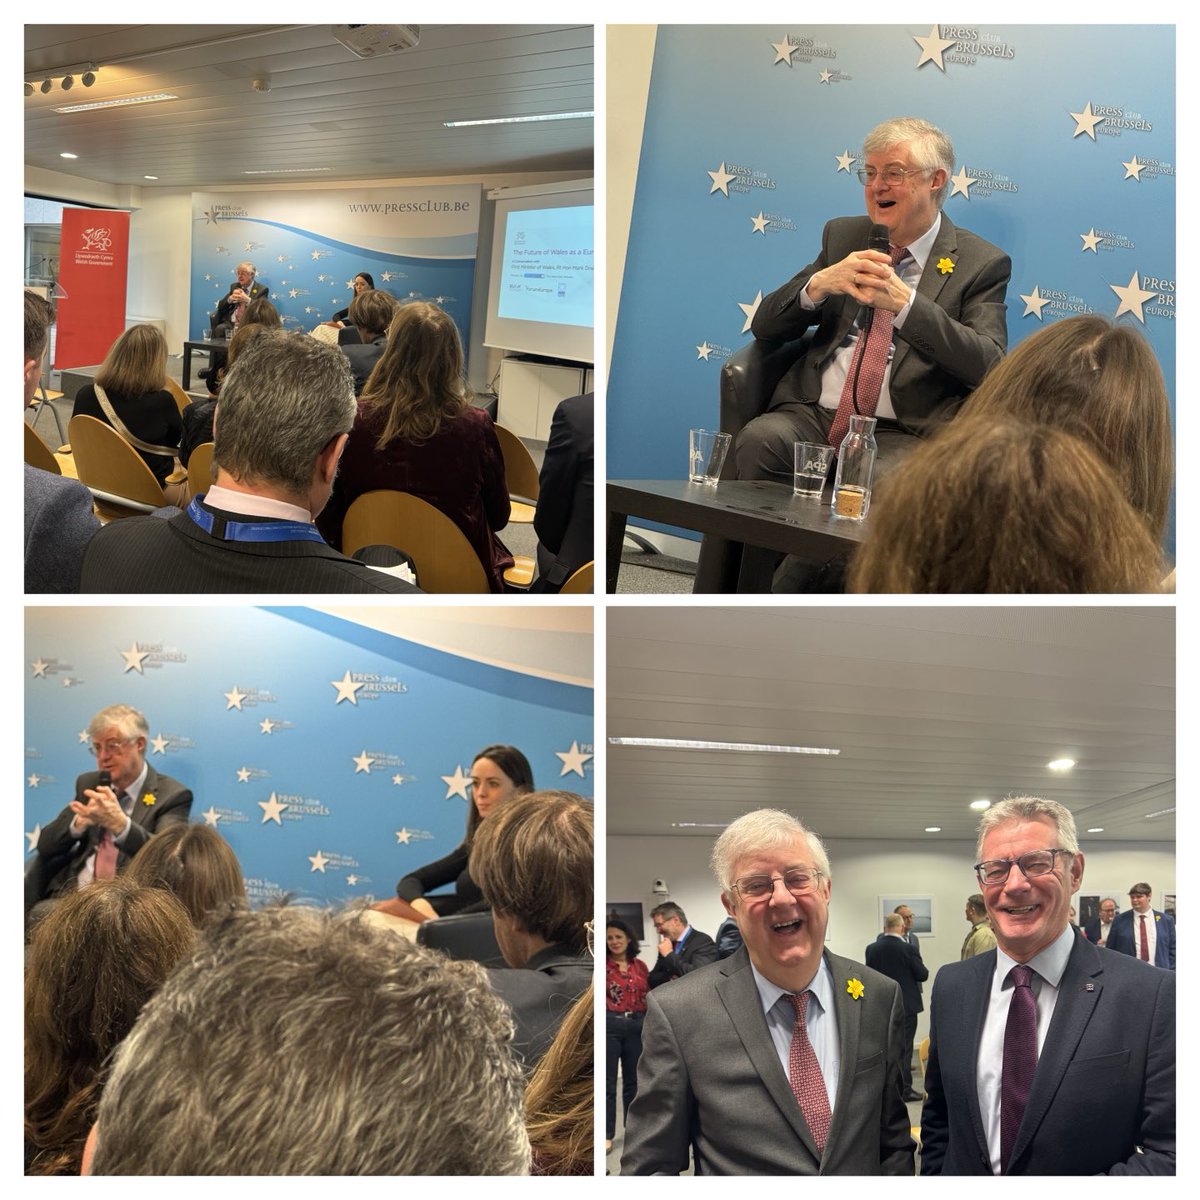 Great to hear and meet First Minister of Wales Mark Drakeford in Brussels.A really interesting, thoughtful and encouraging speech. Wish him well in his politics post FM role.